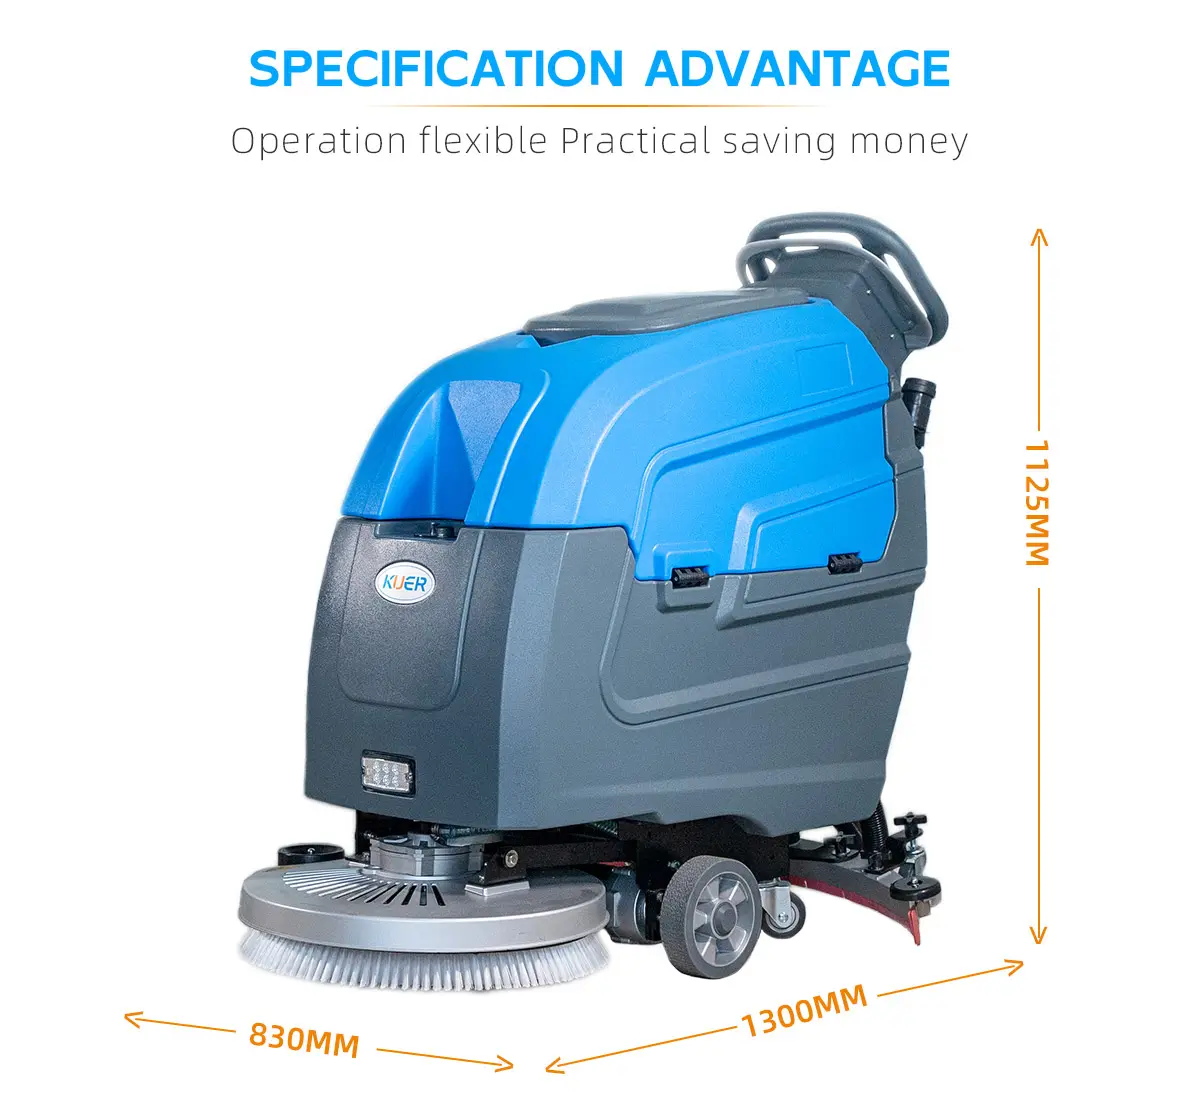 KUER 19 inch Automatic Industrial Electric Self-propelled Floor Cleaning Washing Machine